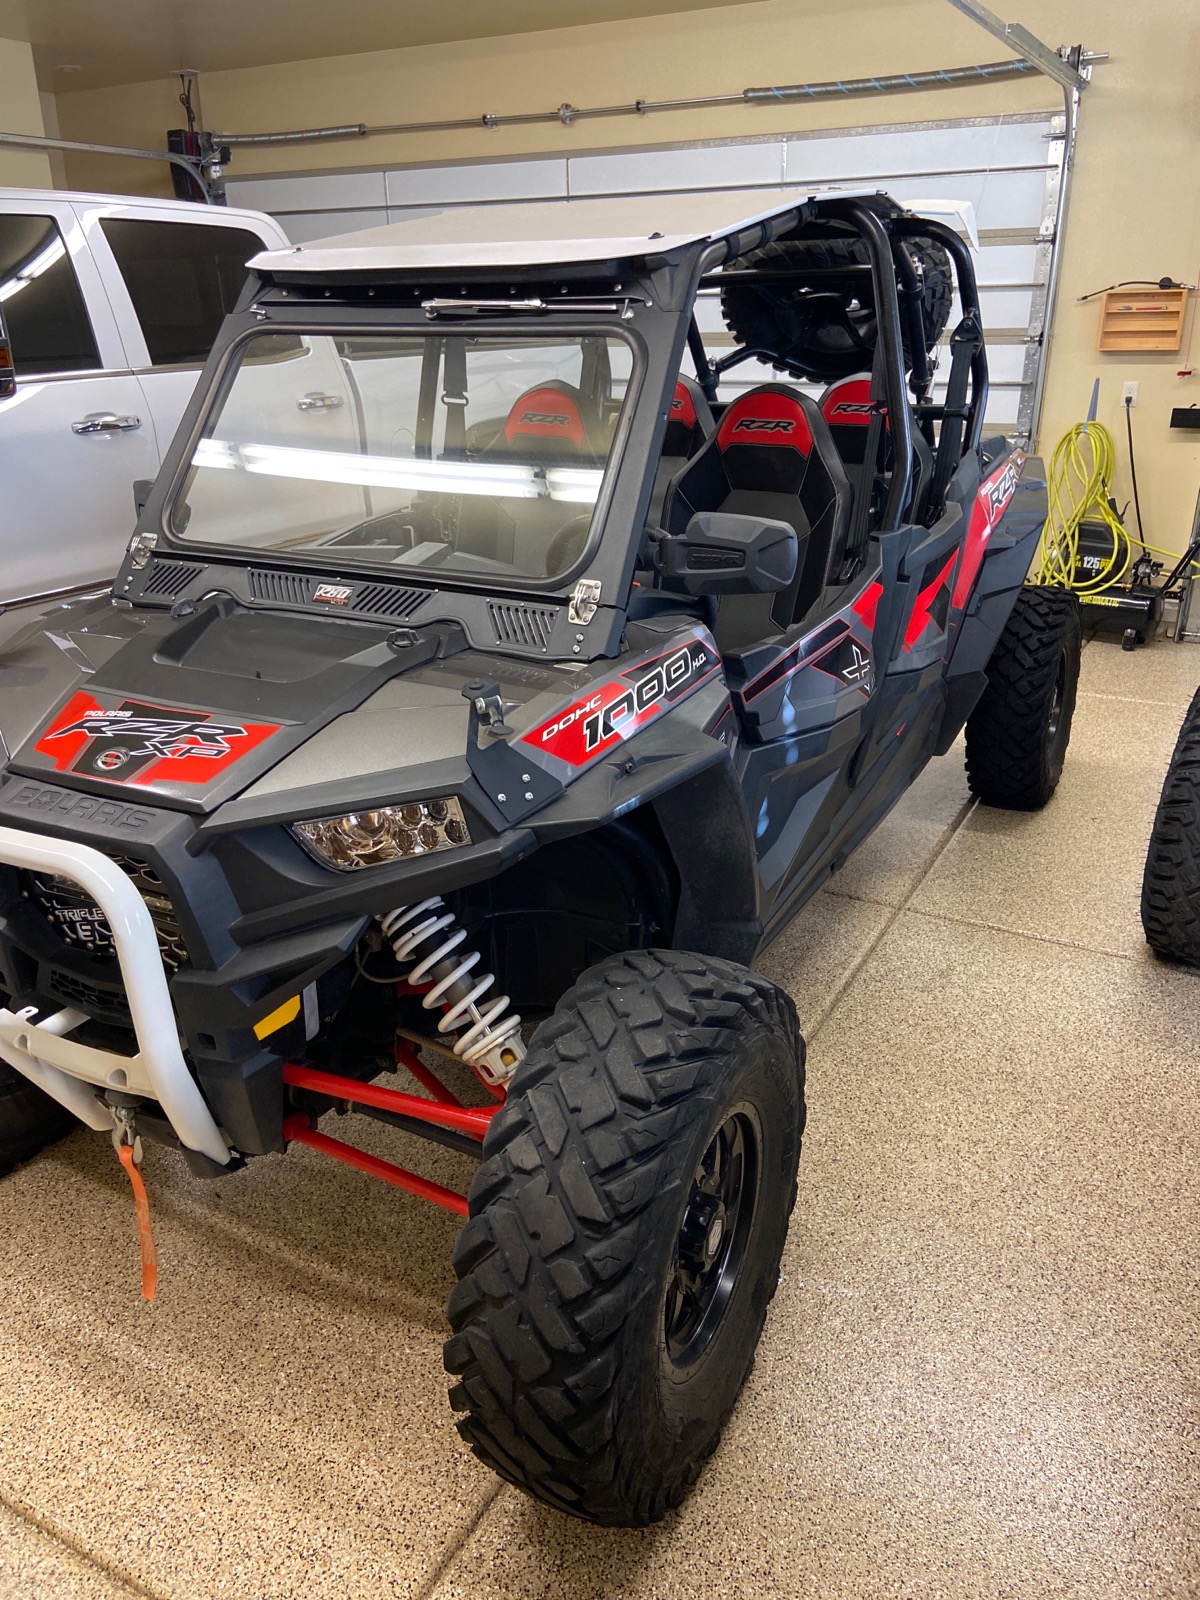 2017 Polaris RZR - Great Condition - Side x Sides for sale ...